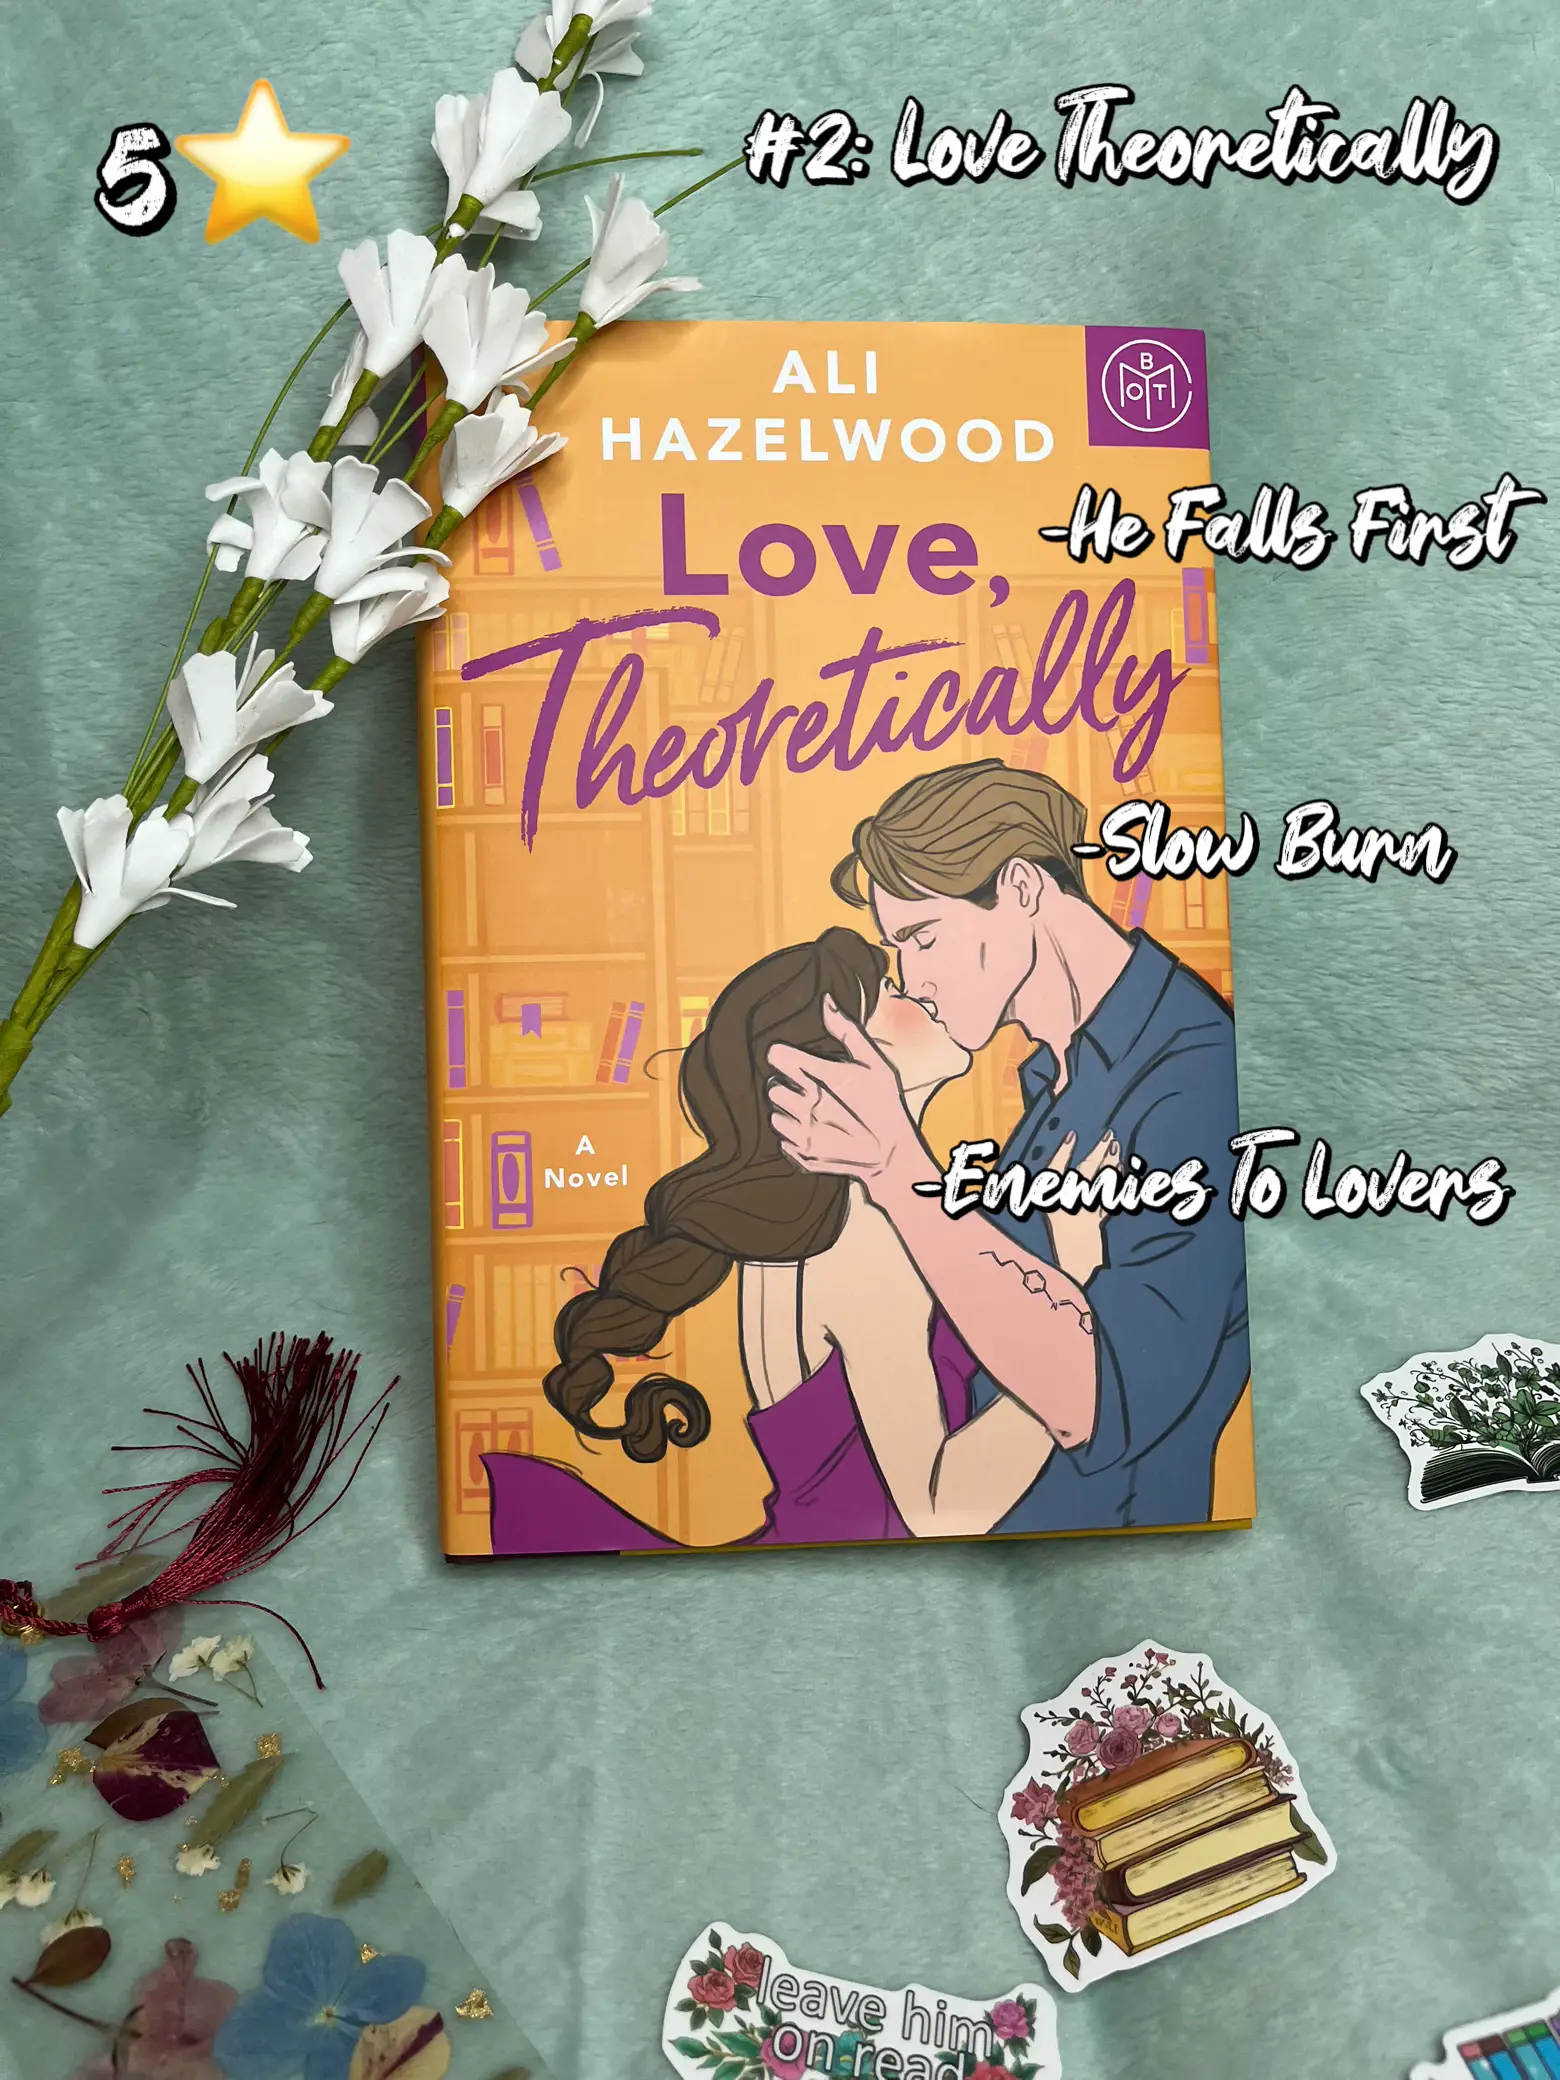 Afterlight Exclusive: Loathe to Love You by Ali Hazelwood